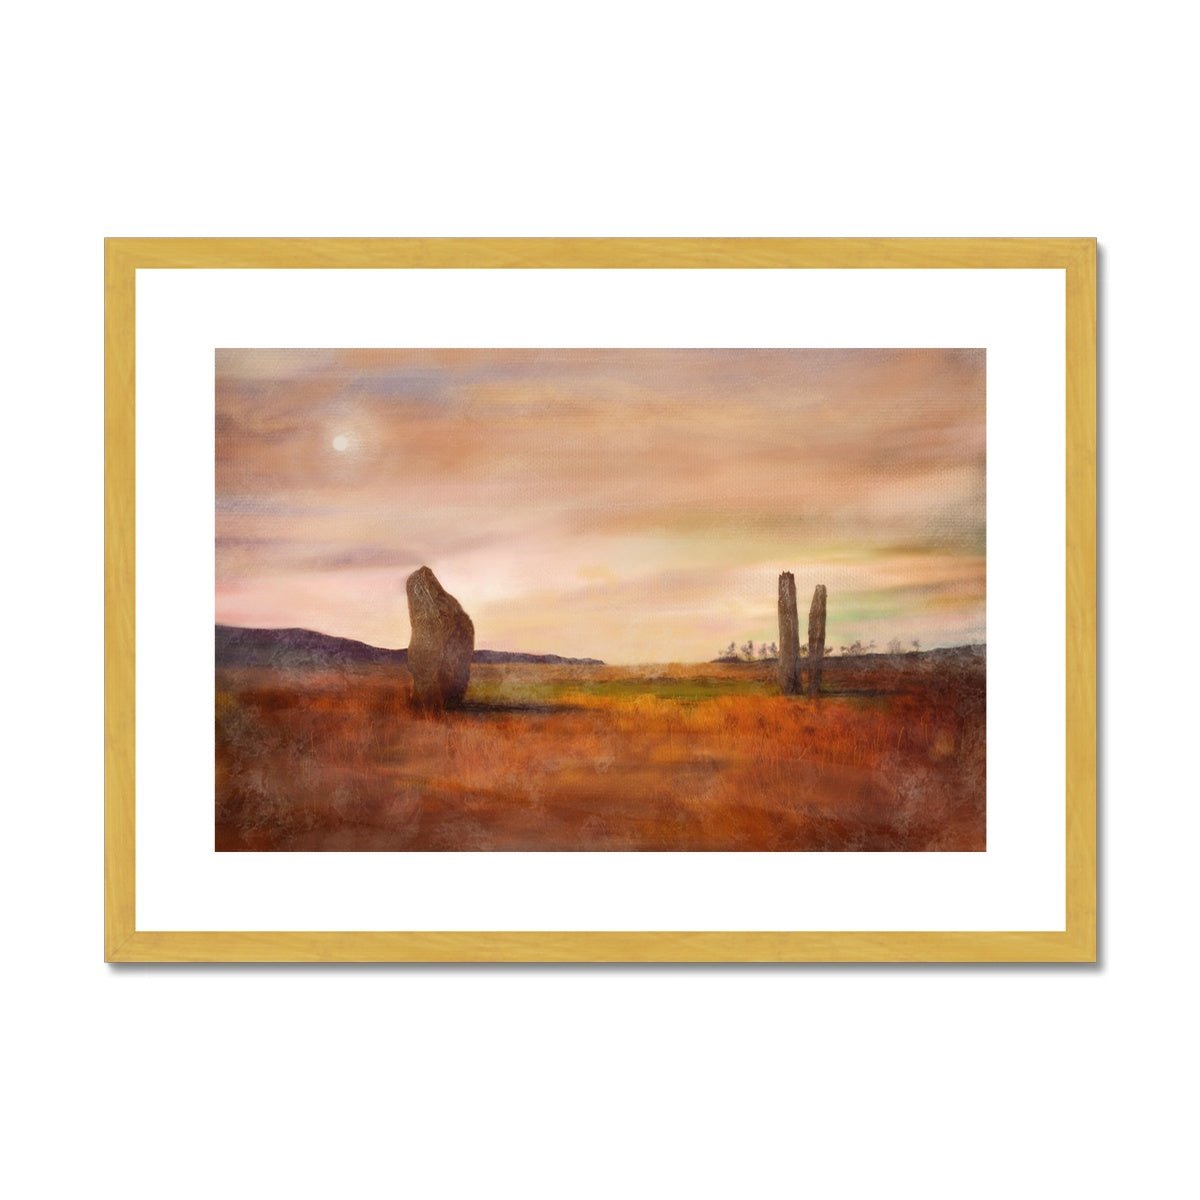 Machrie Moor Moonlight Painting | Antique Framed & Mounted Prints From Scotland-Antique Framed & Mounted Prints-Arran Art Gallery-A2 Landscape-Gold Frame-Paintings, Prints, Homeware, Art Gifts From Scotland By Scottish Artist Kevin Hunter